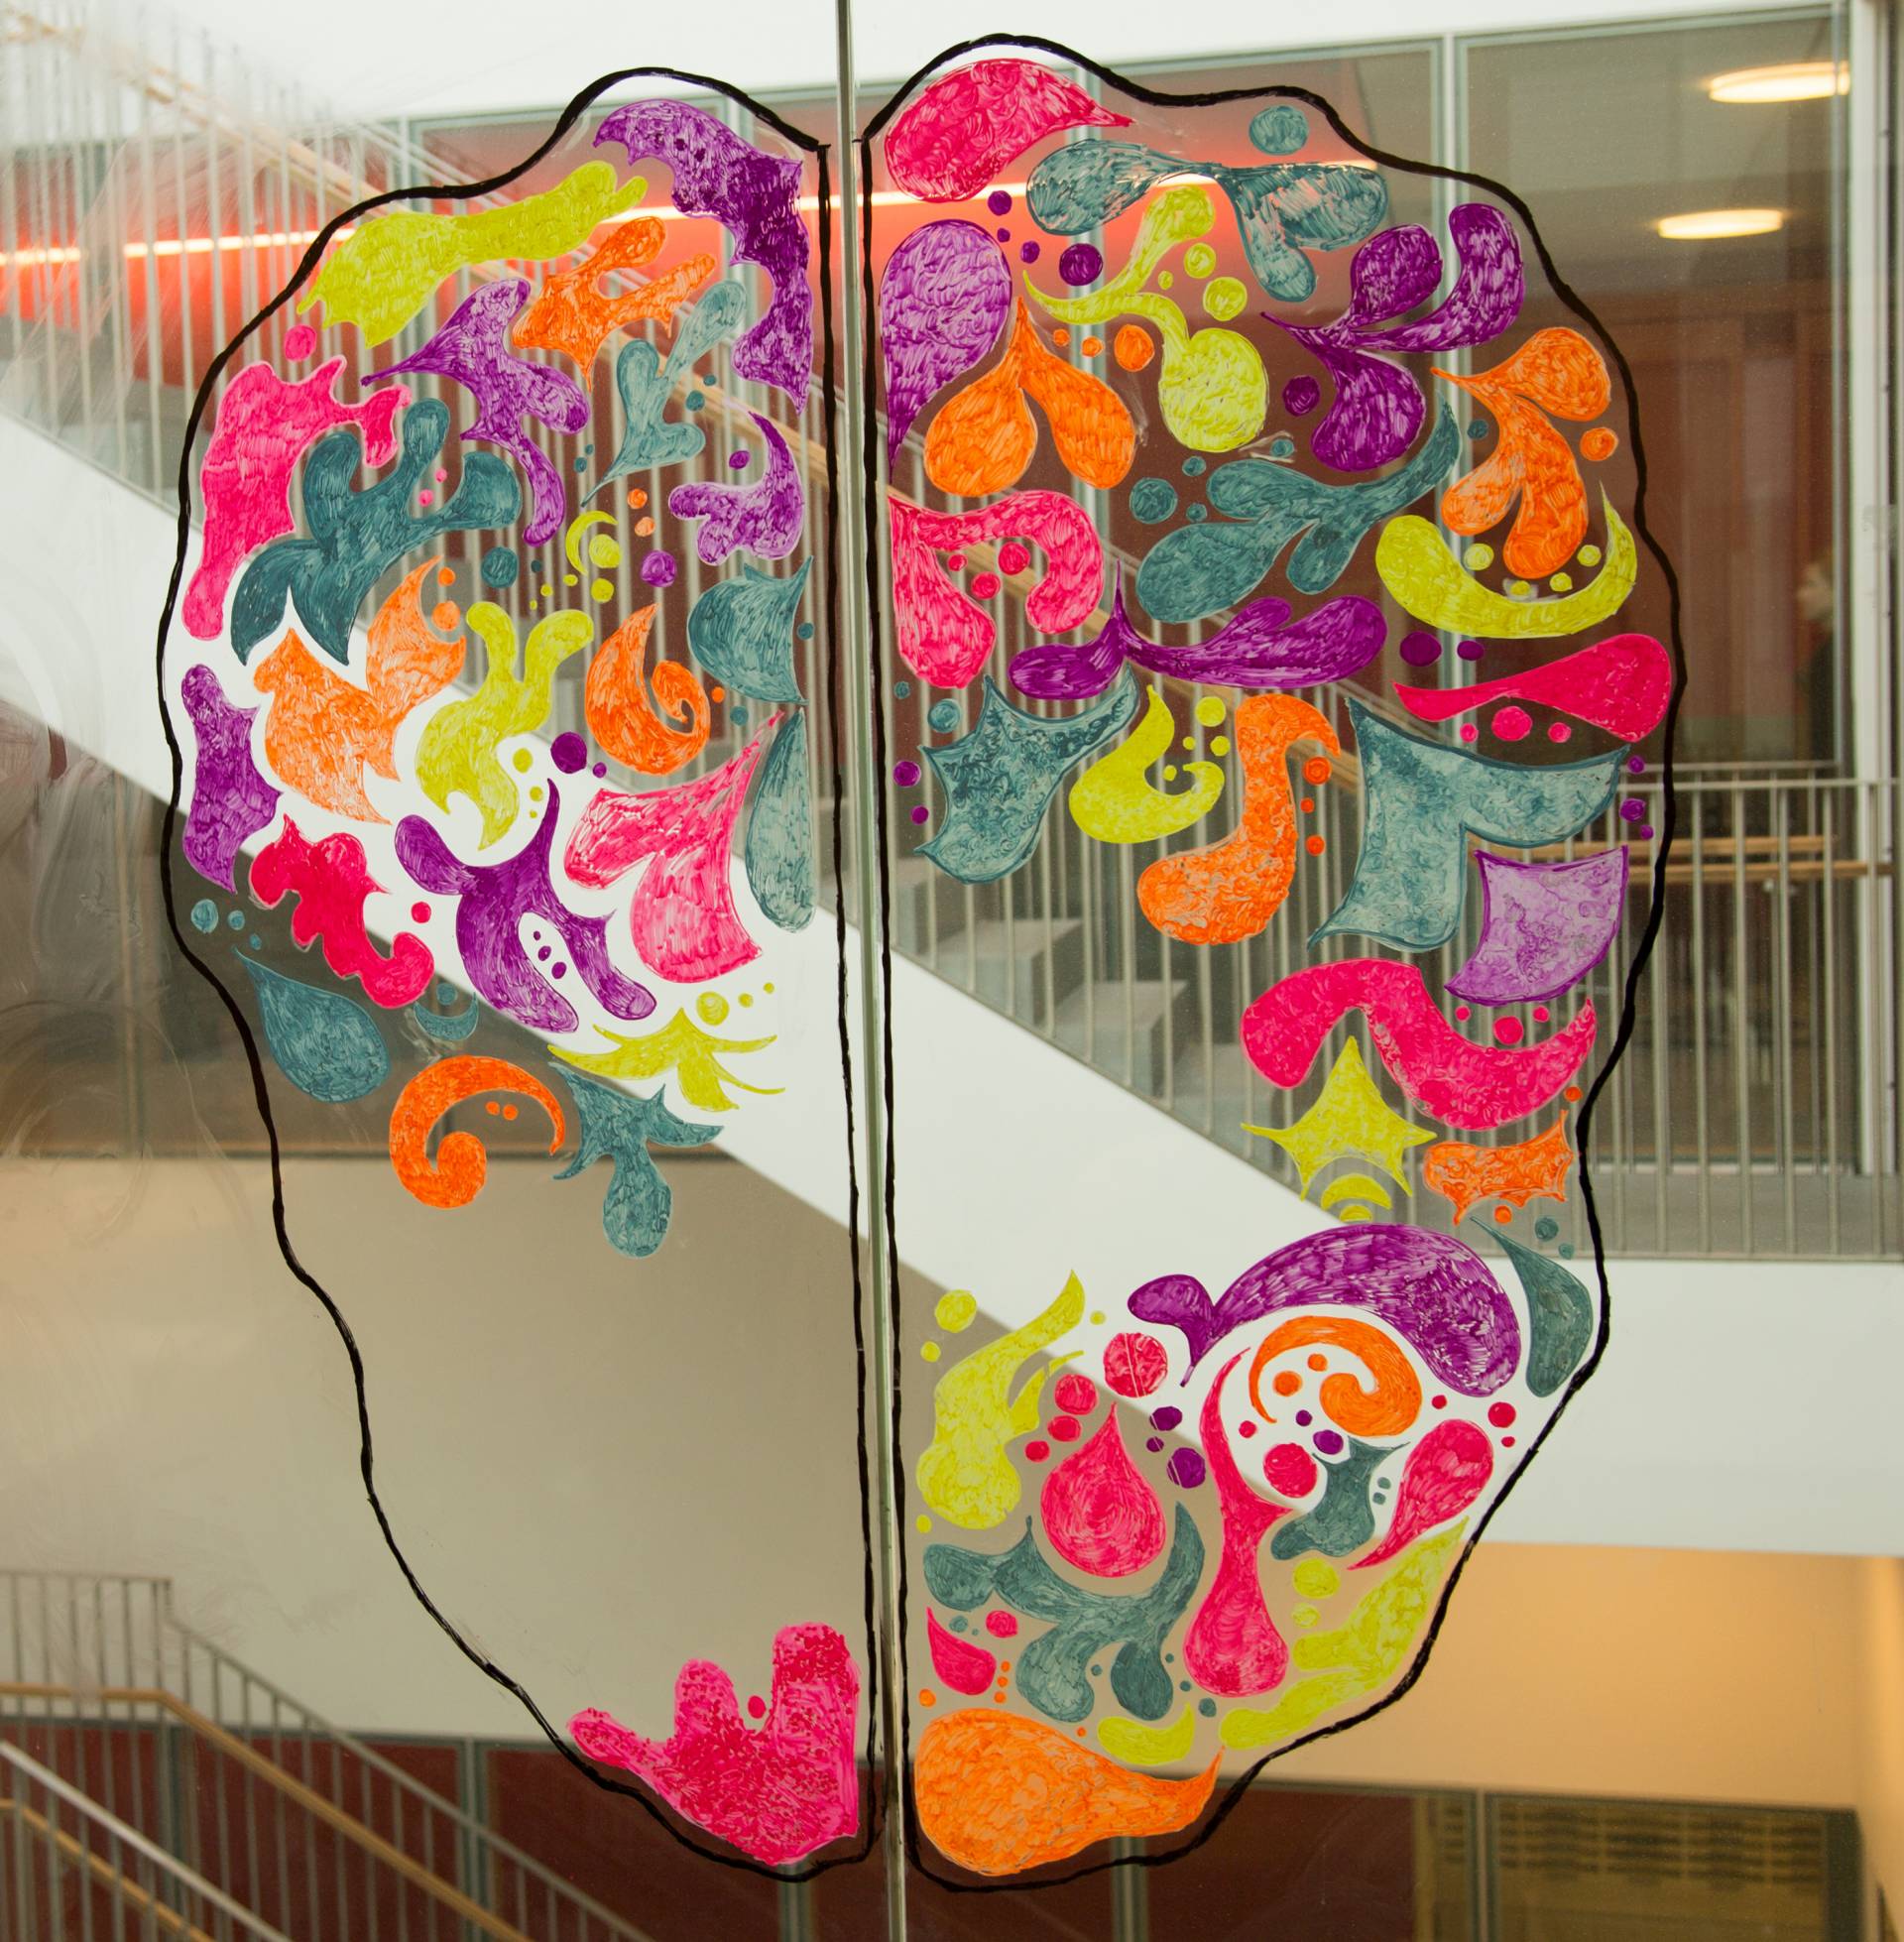 Mural on window of a colorful brain